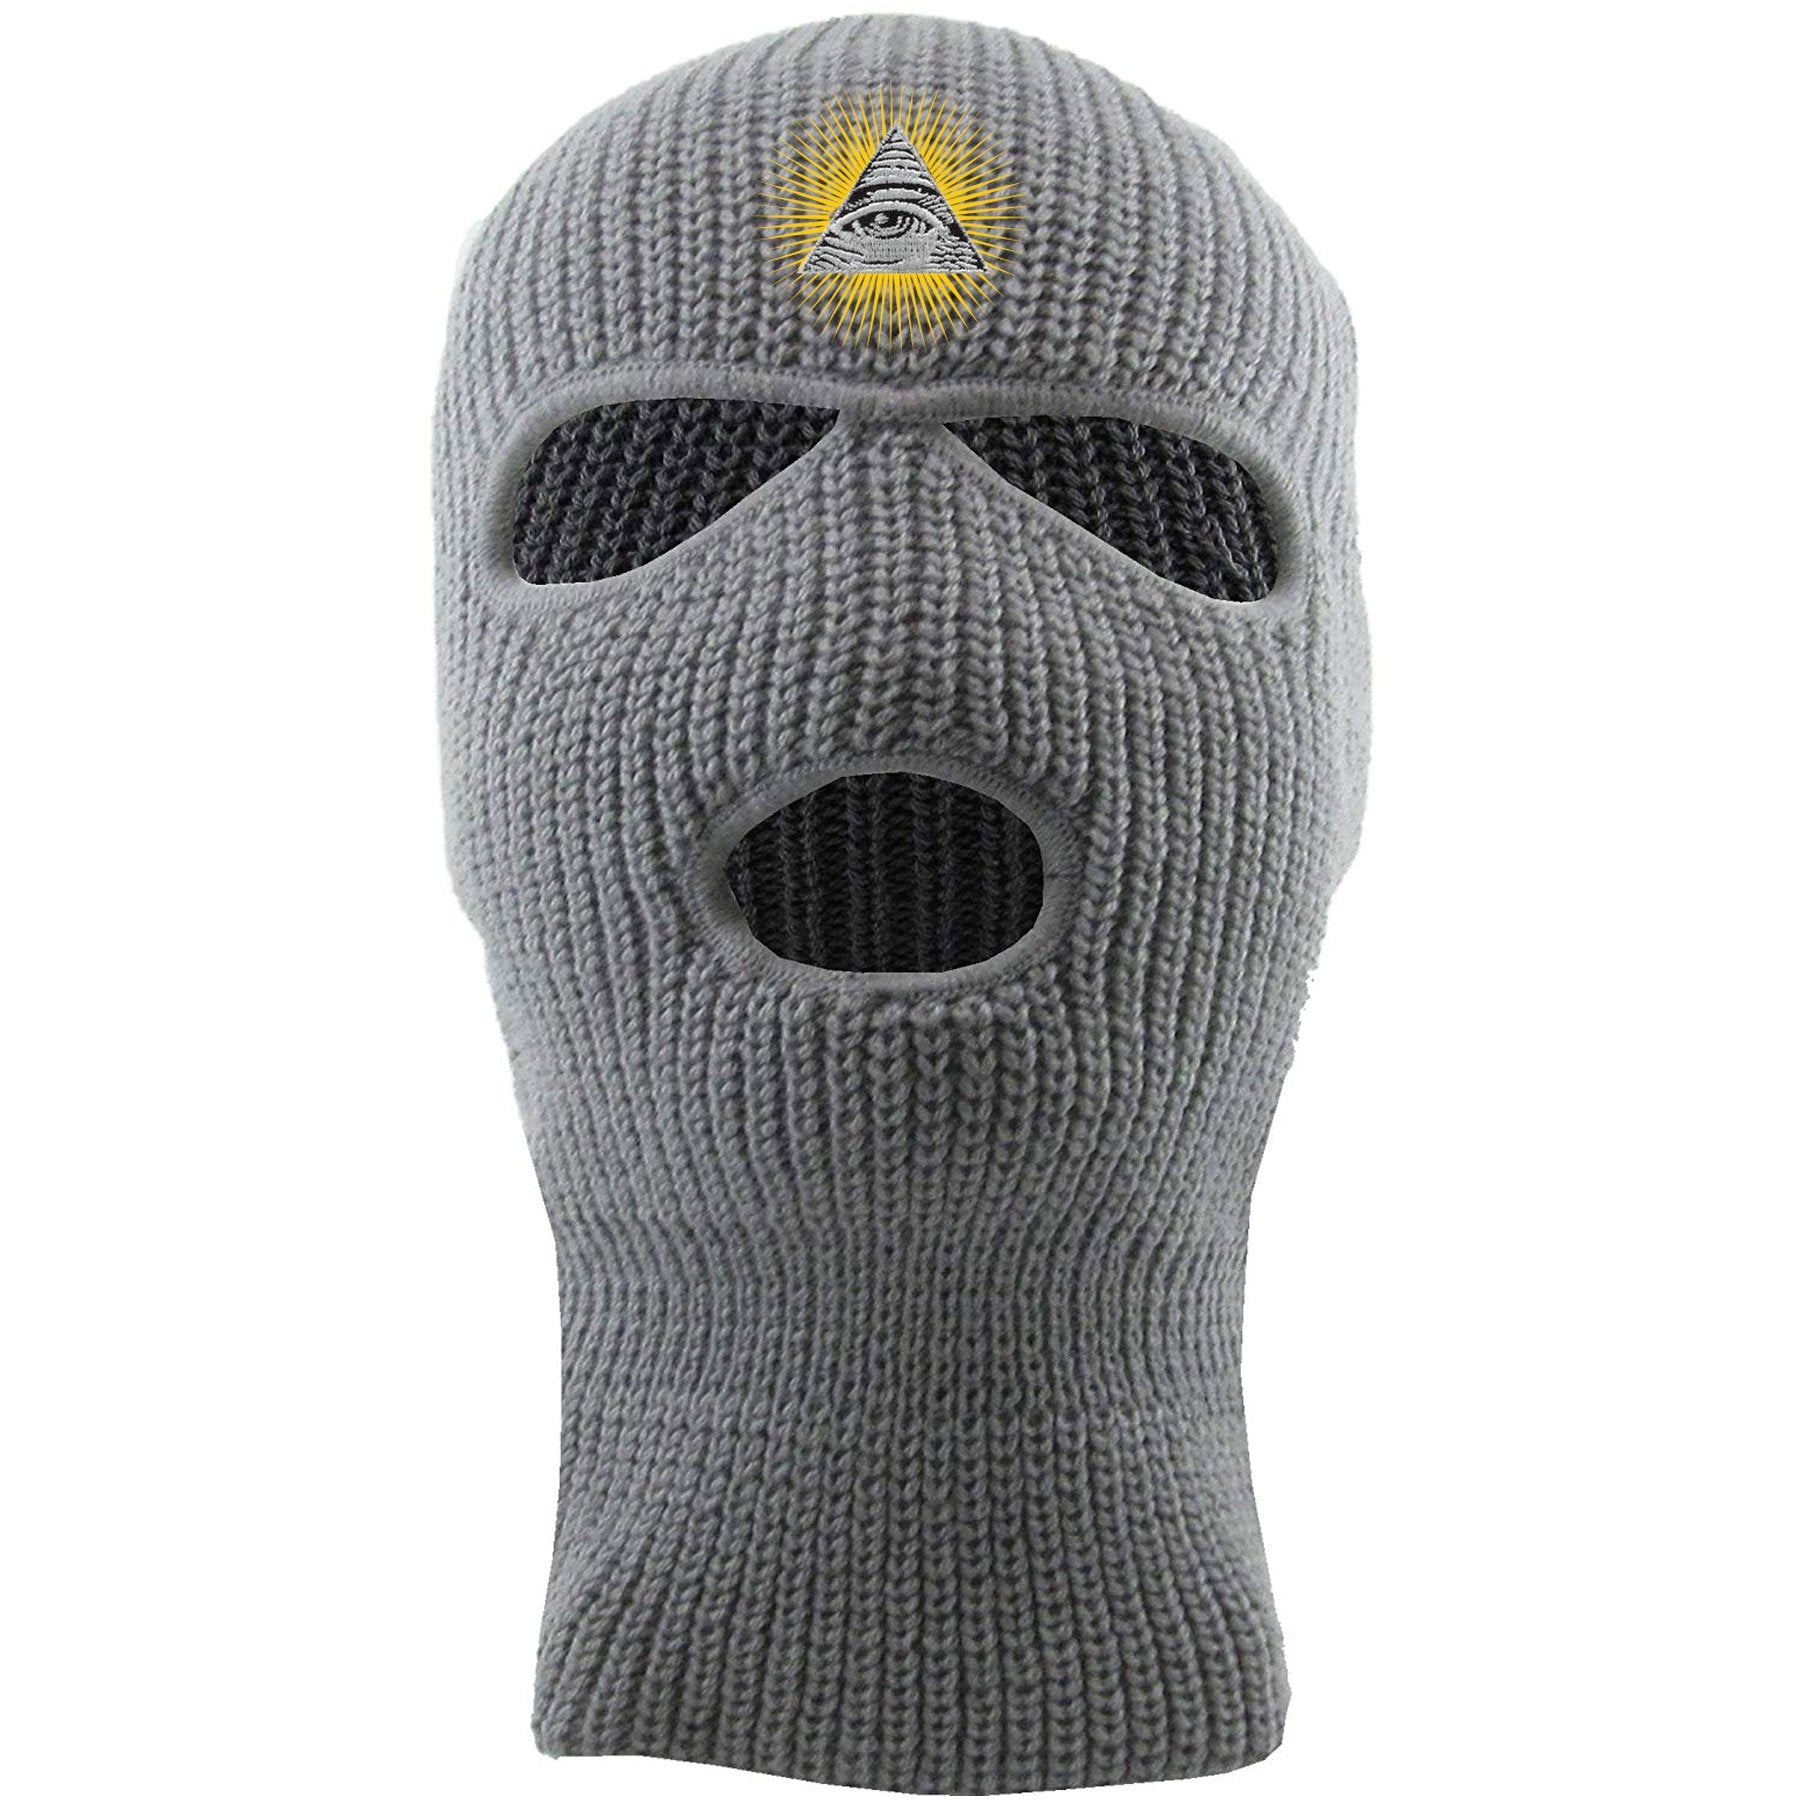 Embroidered on the front of the all seeing eye light gray ski mask is the pyramid logo embroidered in white, black, and gold